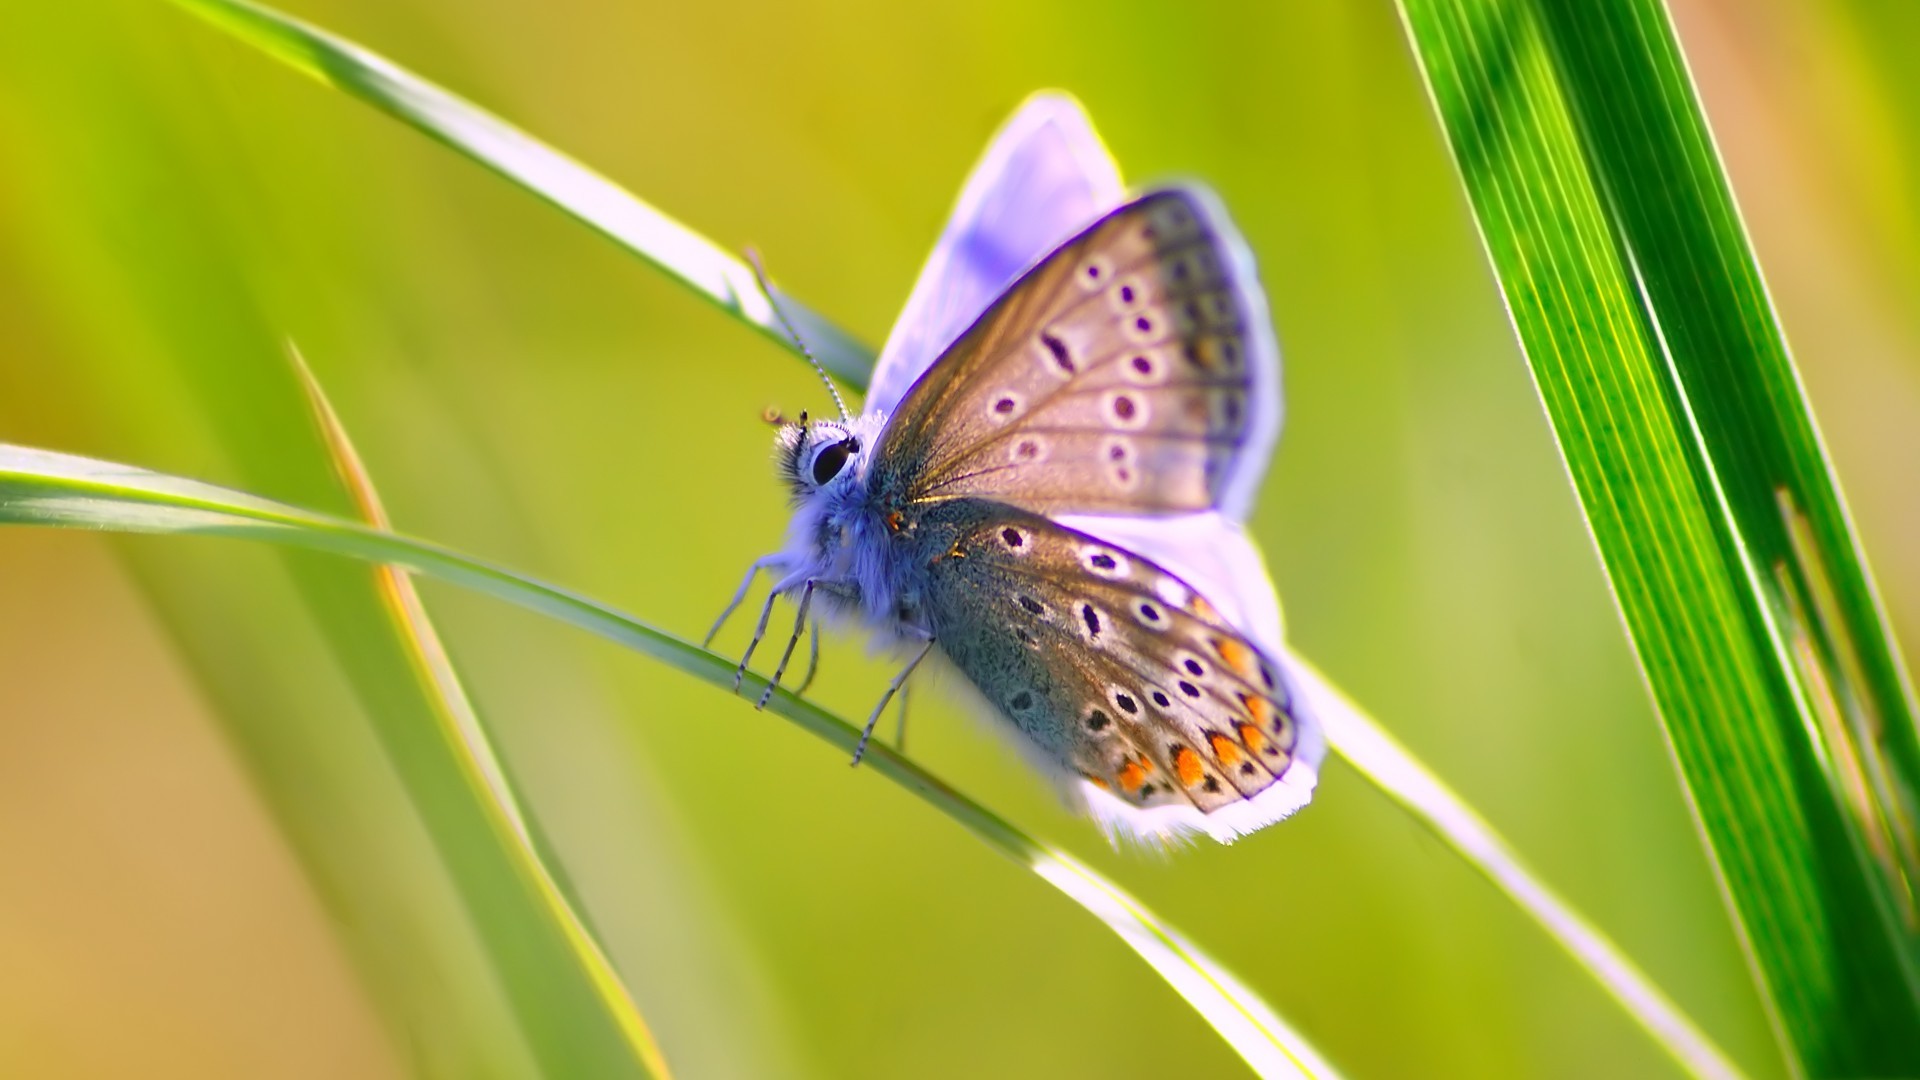 General 1920x1080 butterfly animals insect grass wildlife nature